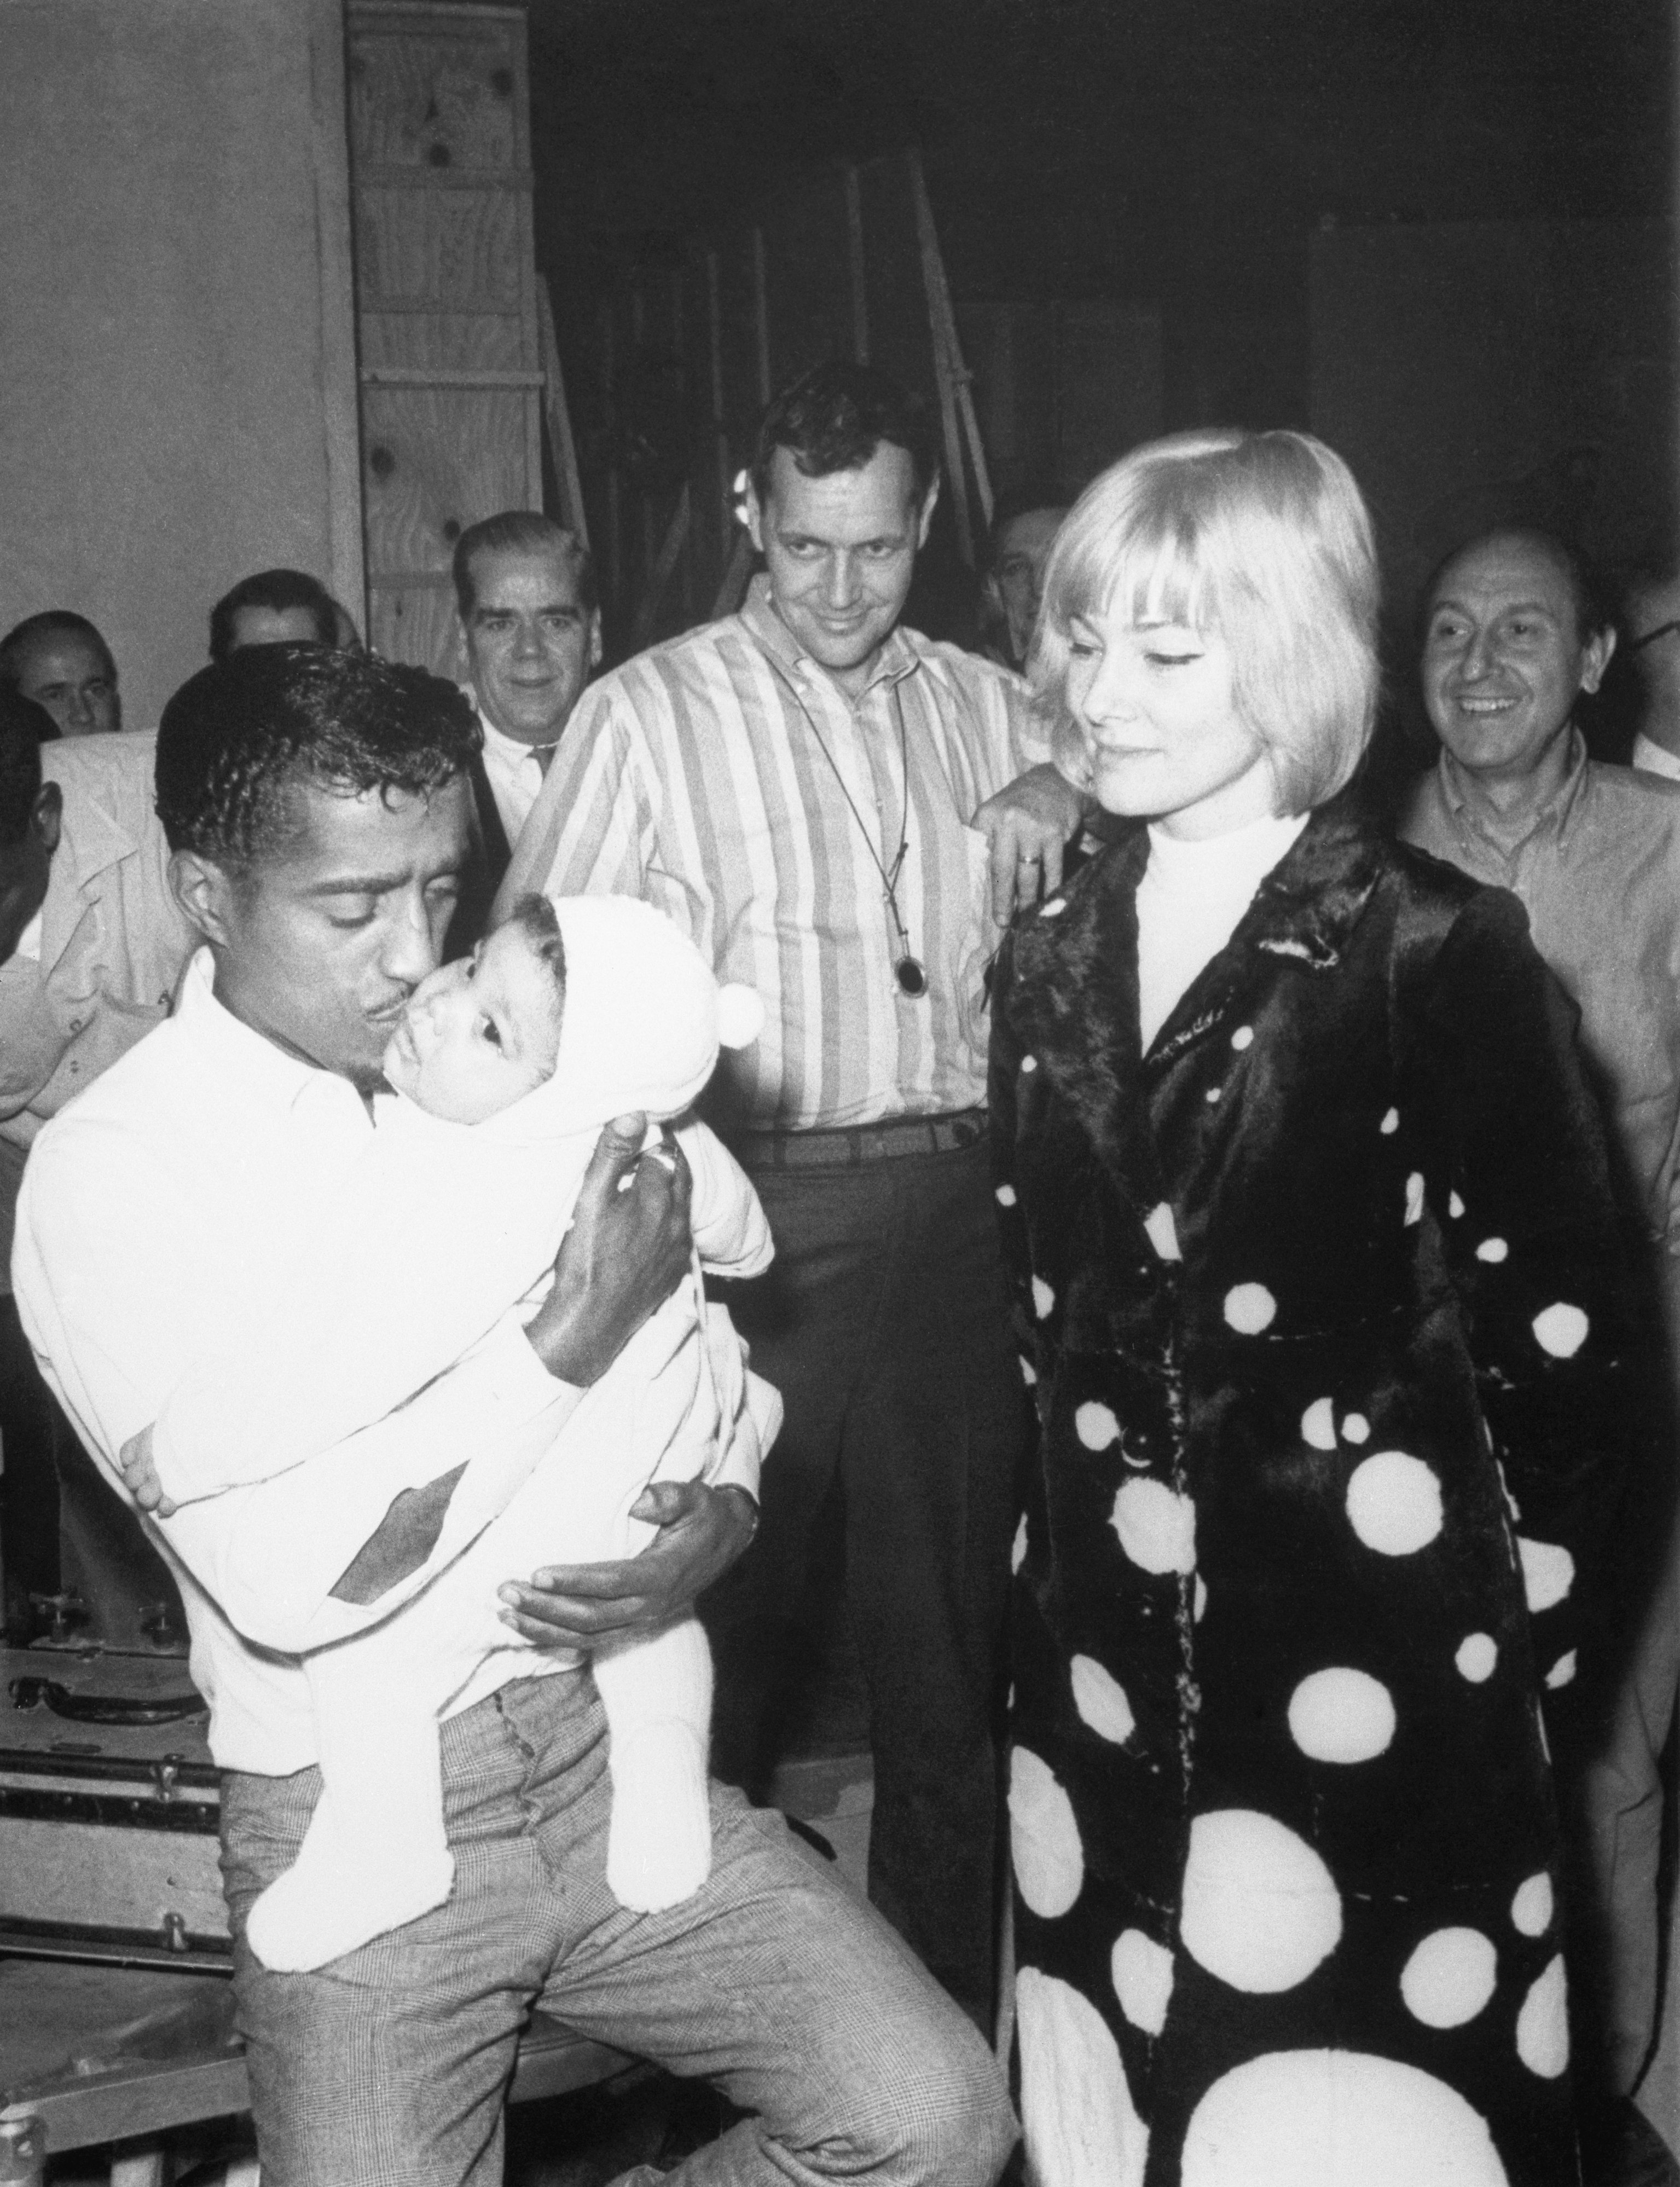 Sammy Davis, Jr. with his wife, May Britt, standing along with crew members of A Man Named Adam. | Source: Getty Images